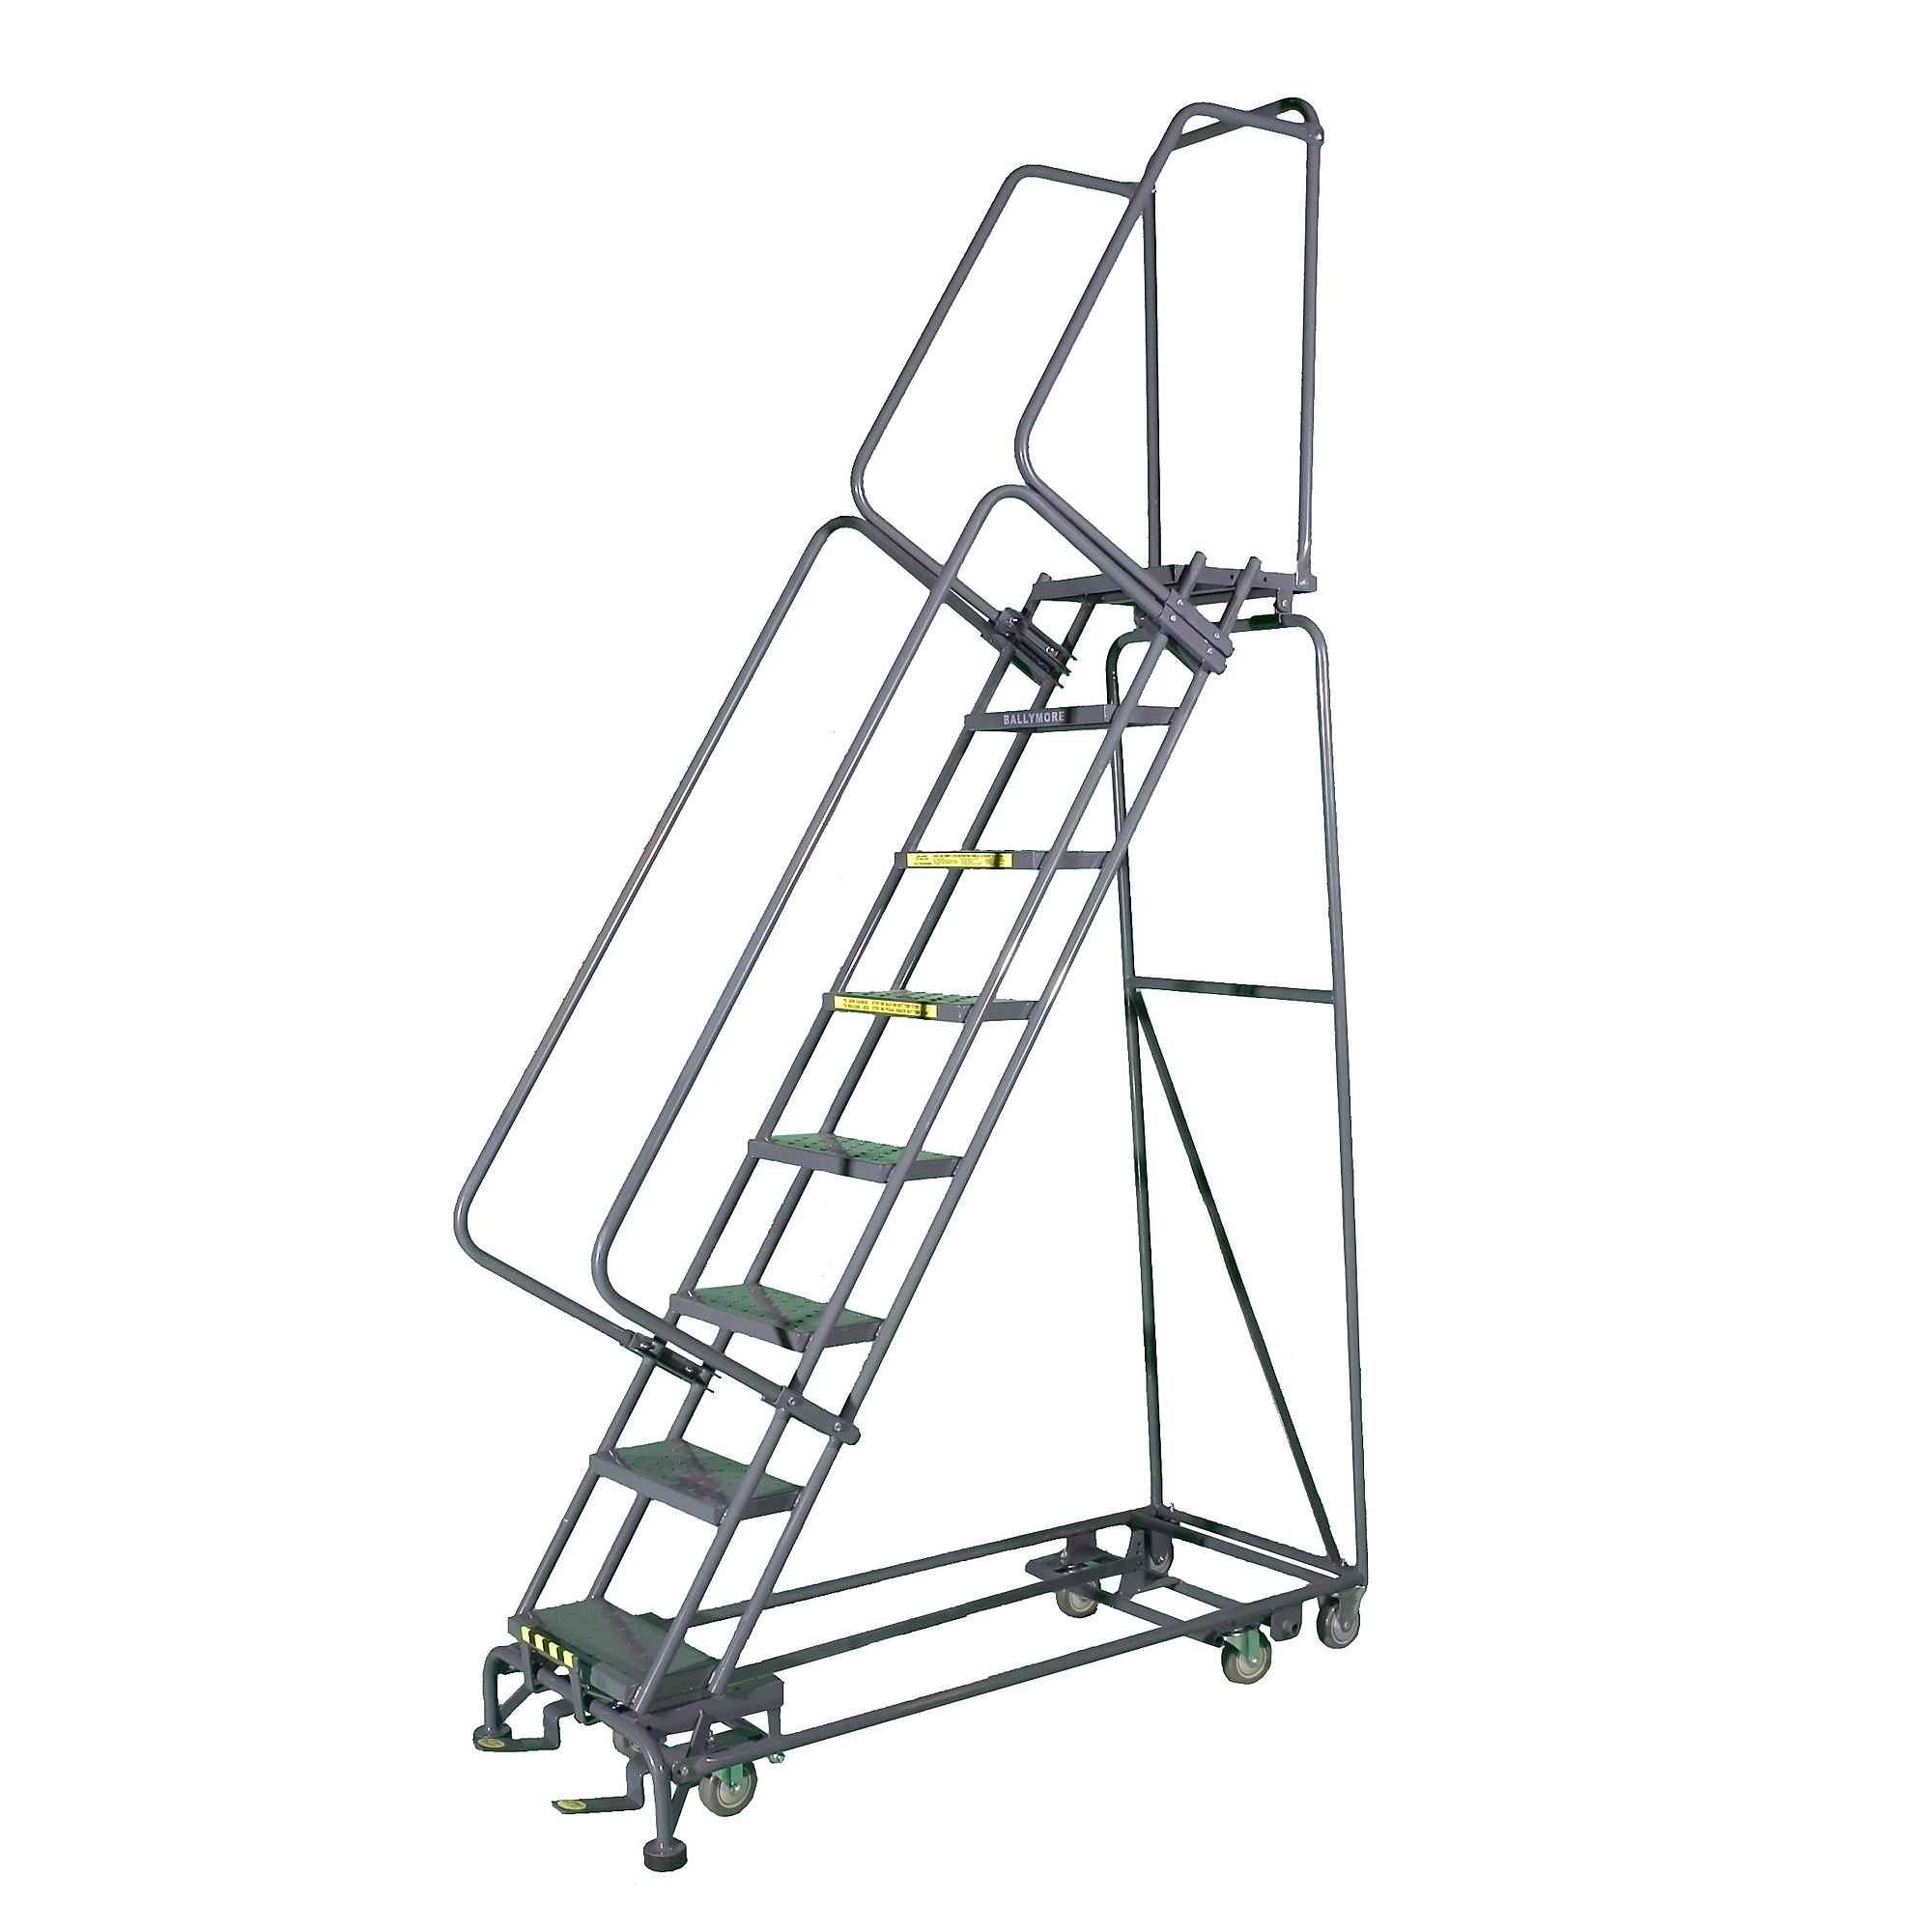 Ballymore, Rolling Ladder, Overall Height 110 in, Steps 8, Material Steel, Model PIP-8-32P